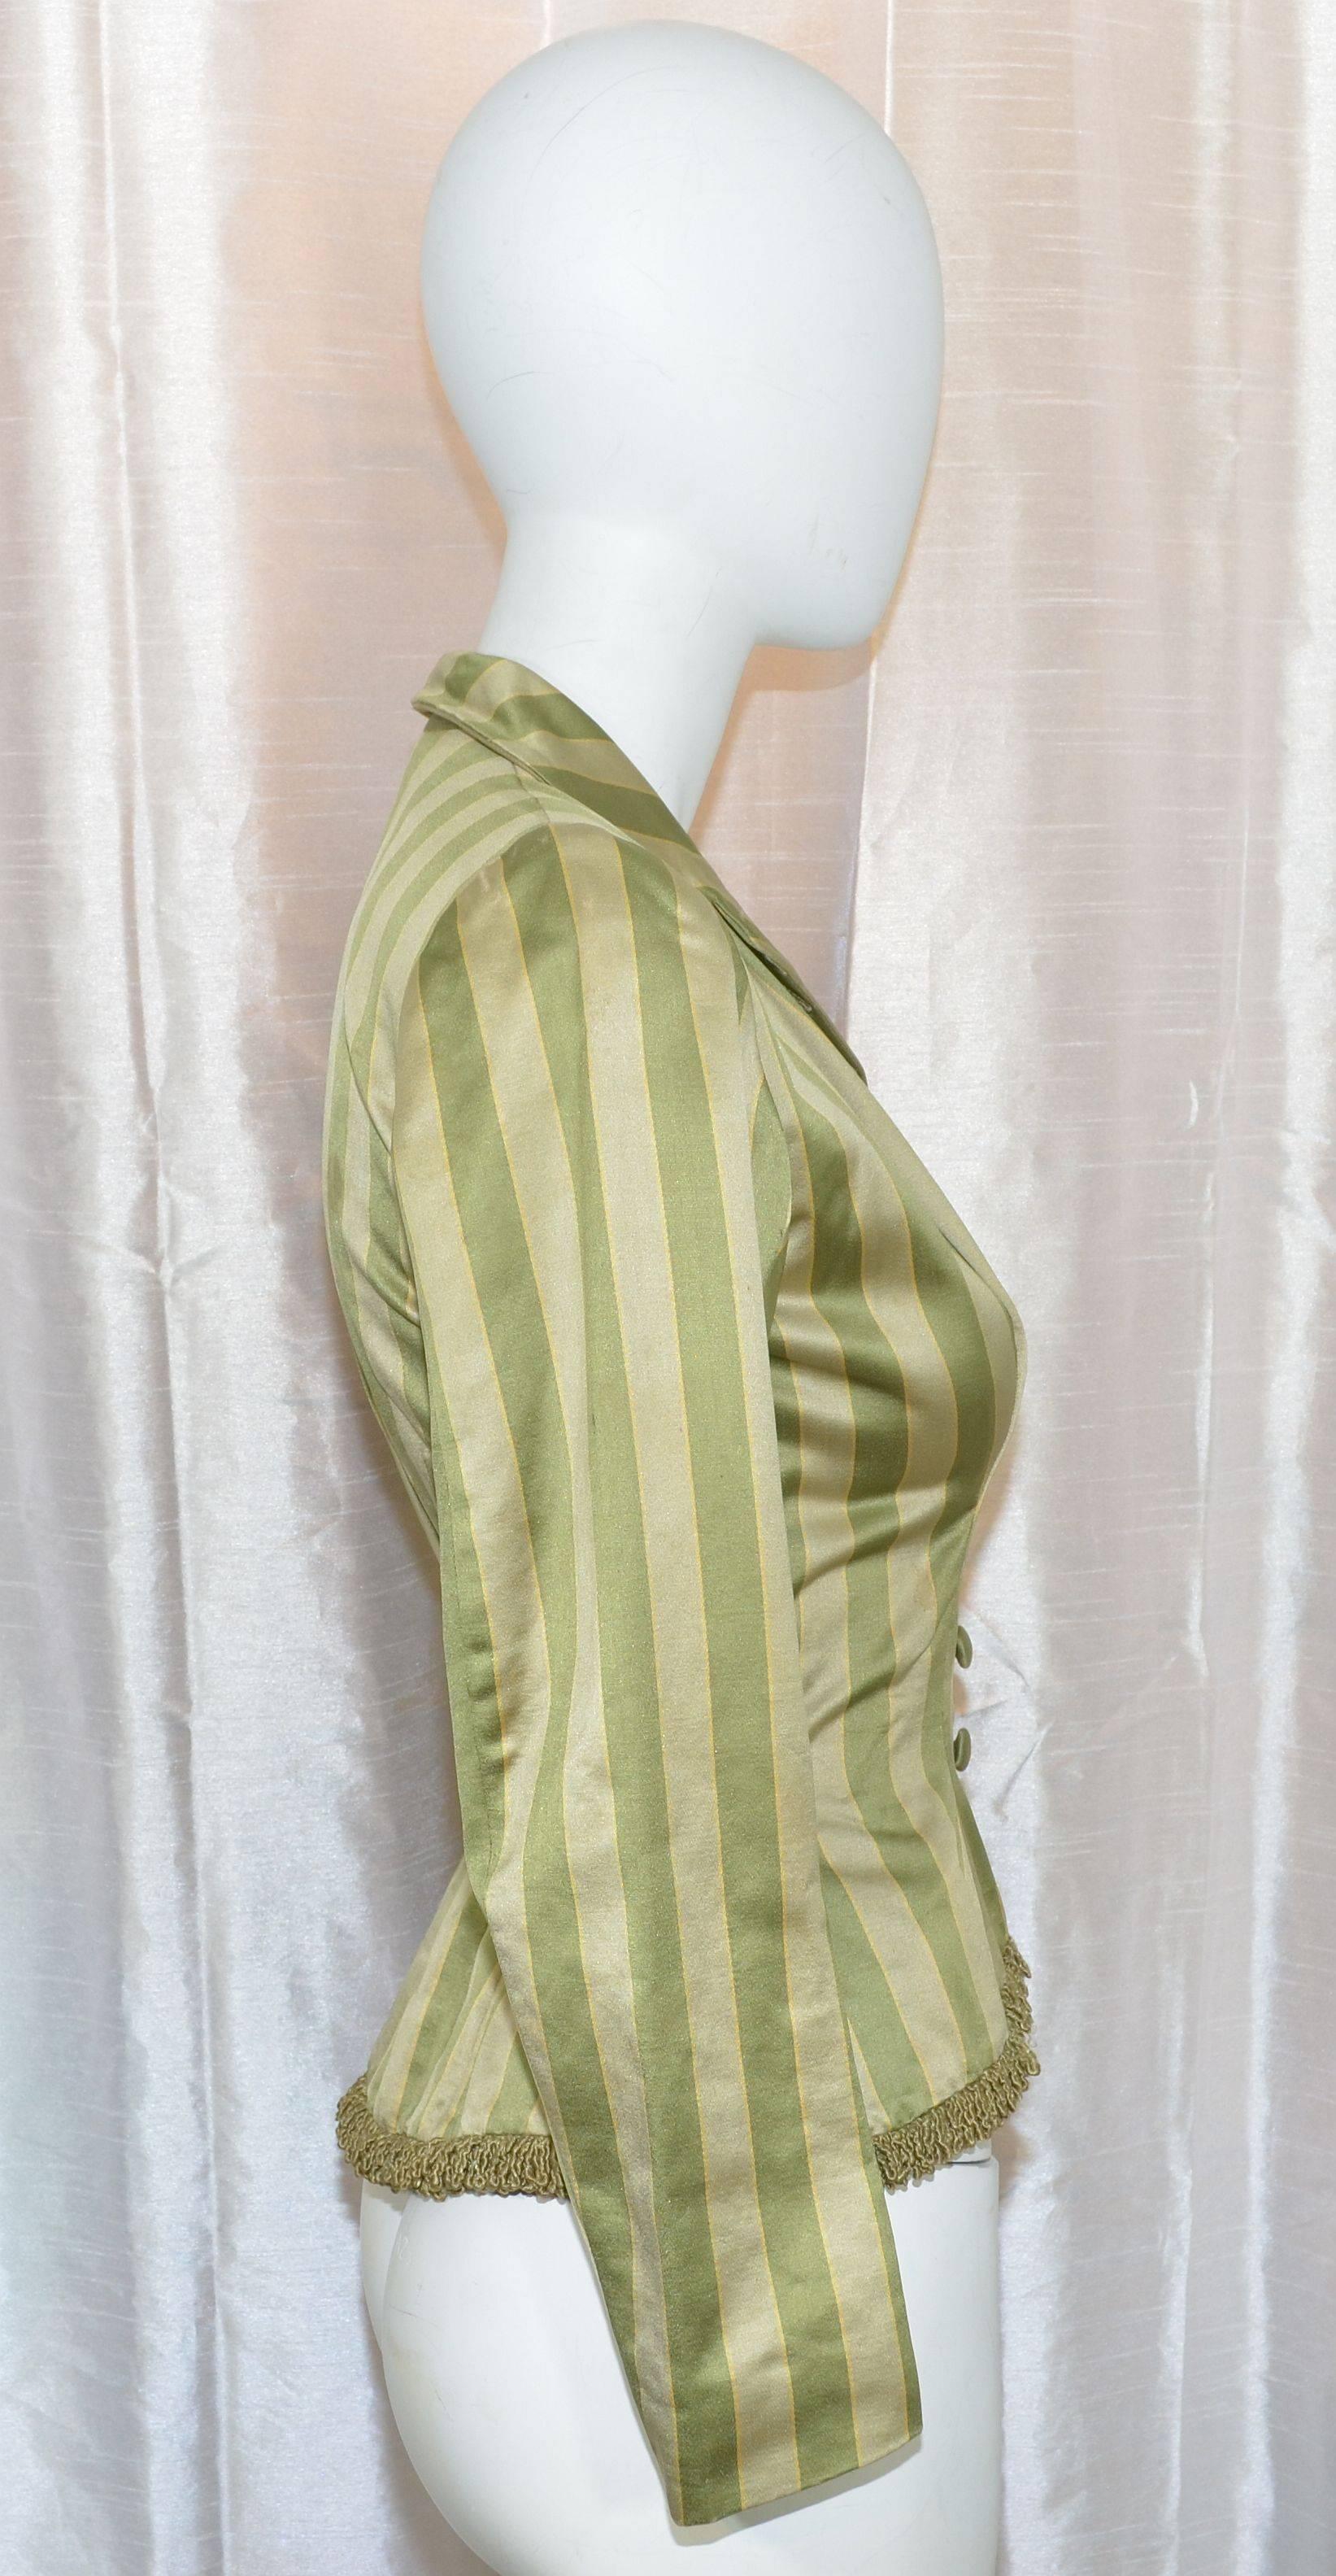 Victorian jacket is featured in an olive/taupe striped pattern, constructed in satin finish fabric with covered button front closures, and a peplum silhouette. Excellent condition considering the age. Fully lined.

Measurements:
bust -